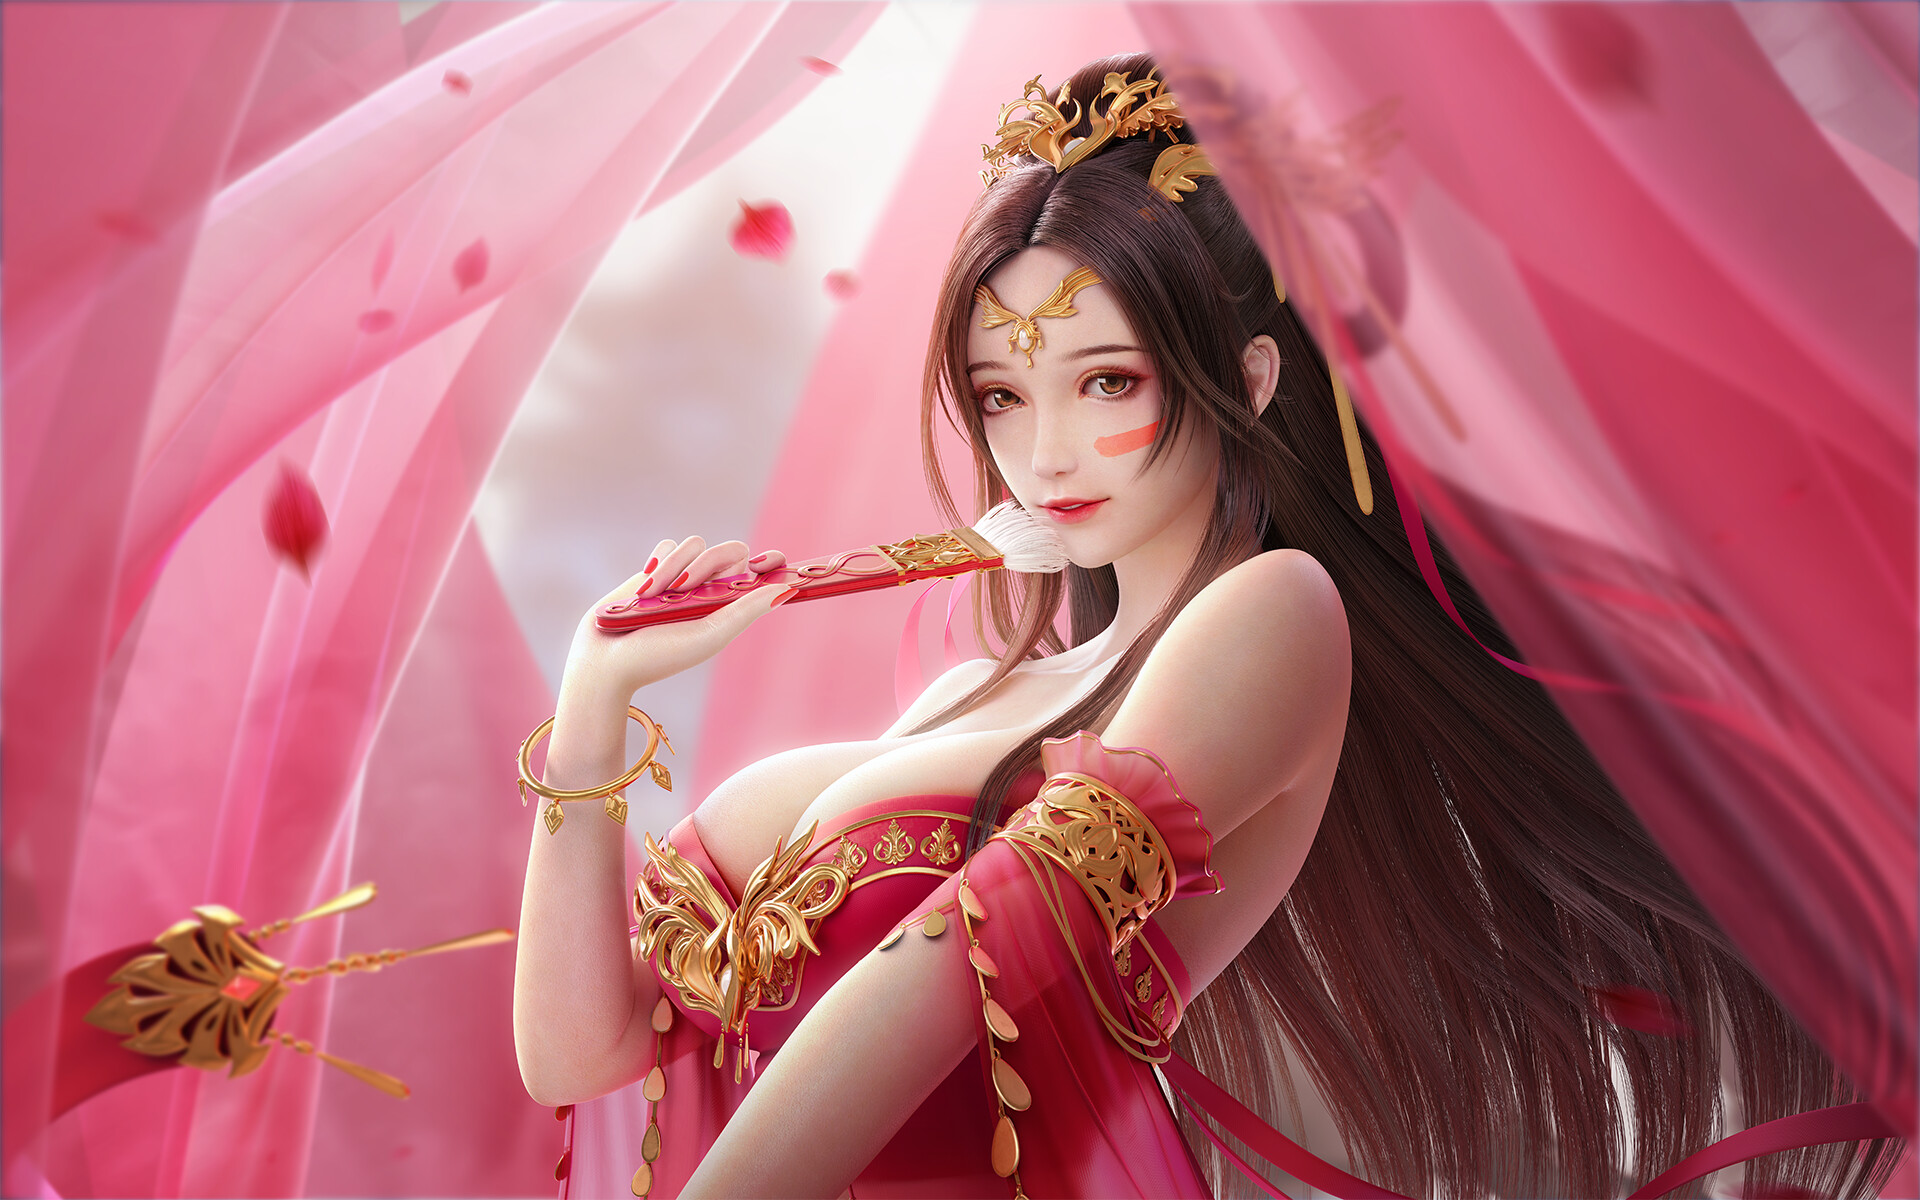 General 1920x1200 Cavan drawing Asian women brunette hair accessories cleavage dress red clothing brush pink curtains face paint